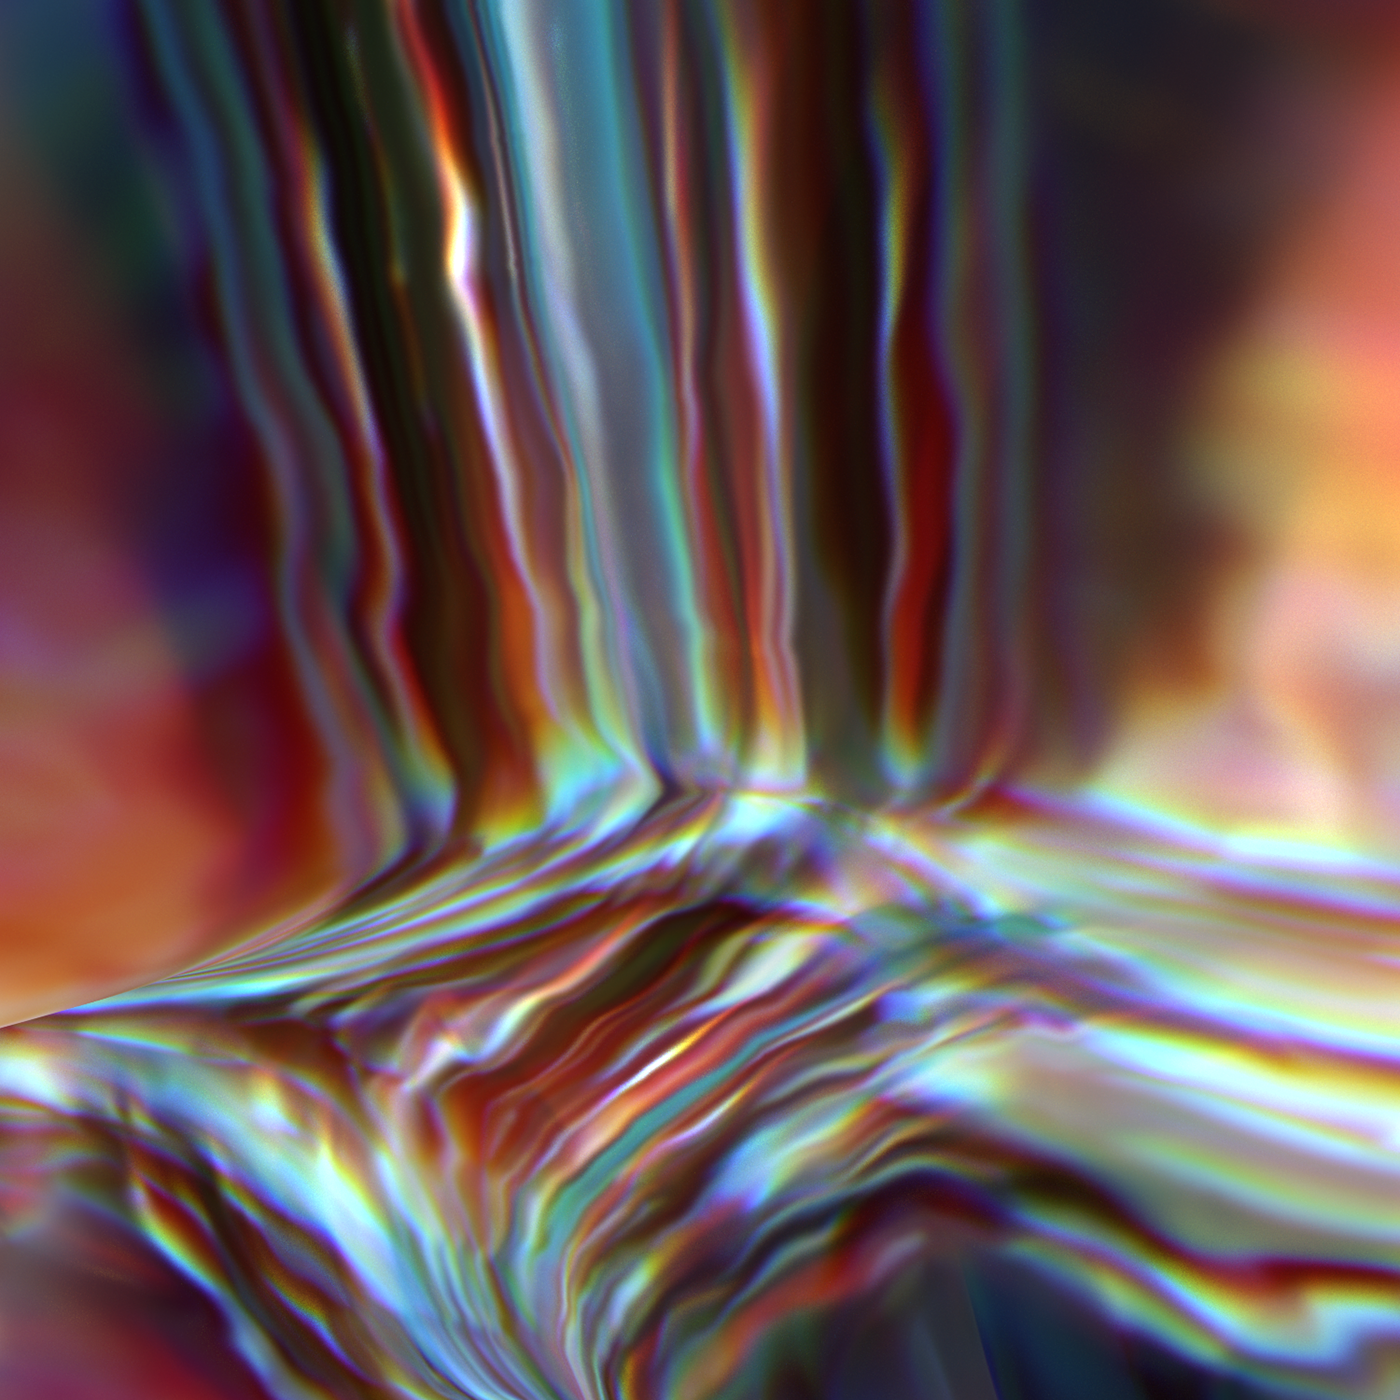 Chromatic abberations chroma waves abberations colors lsd glass everydays redshift light